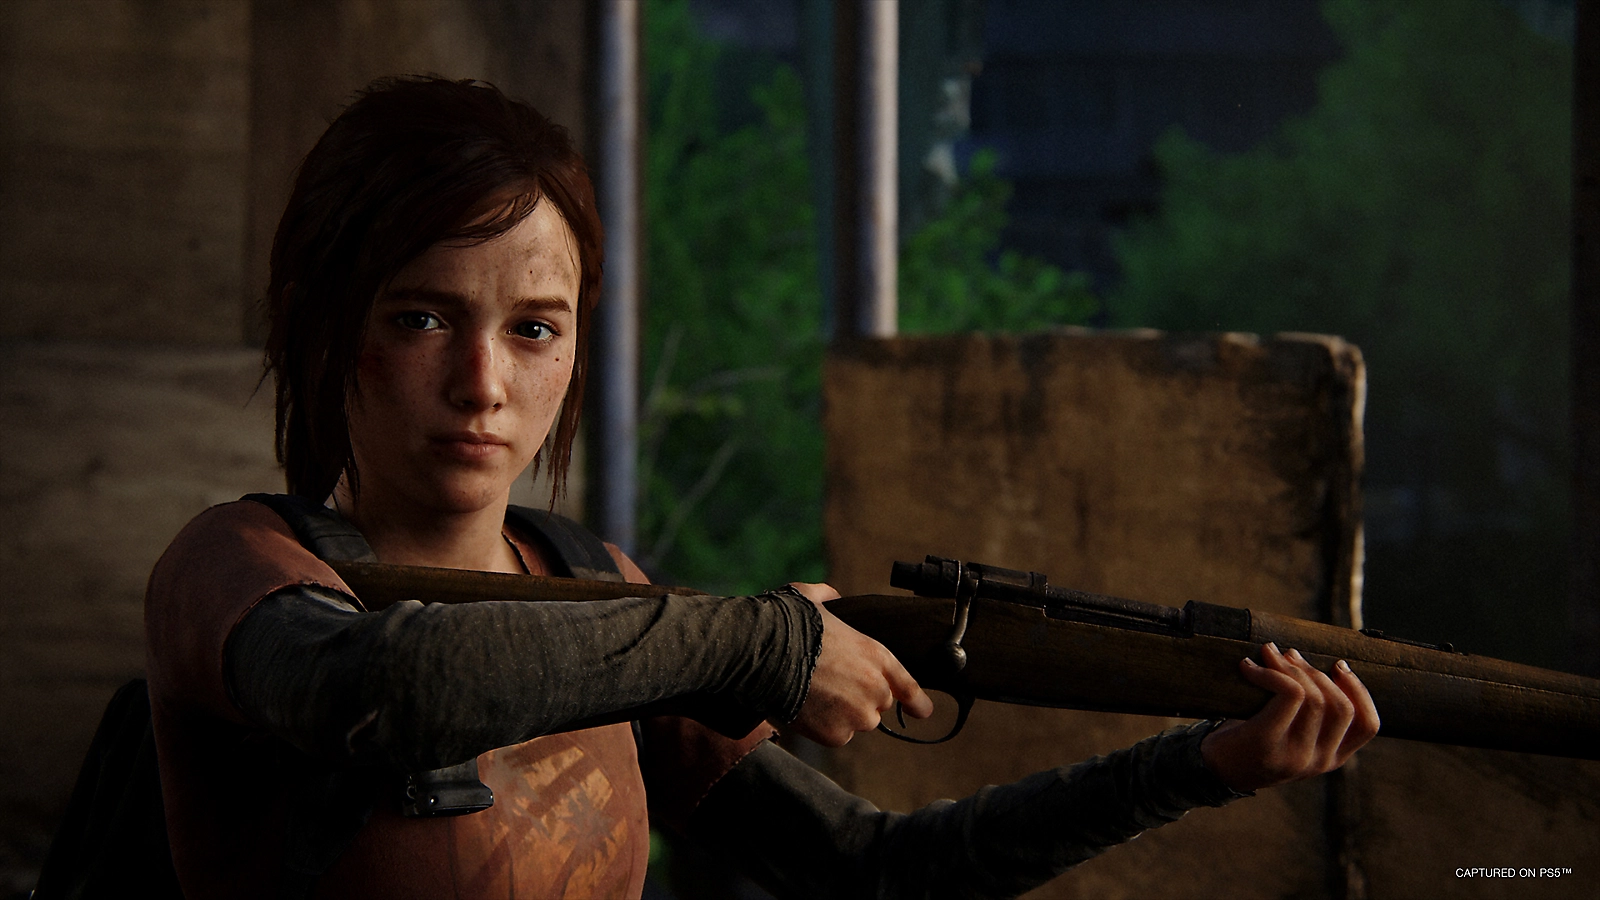 The Last of Us Day: Naughty Dog celebra a data com brindes